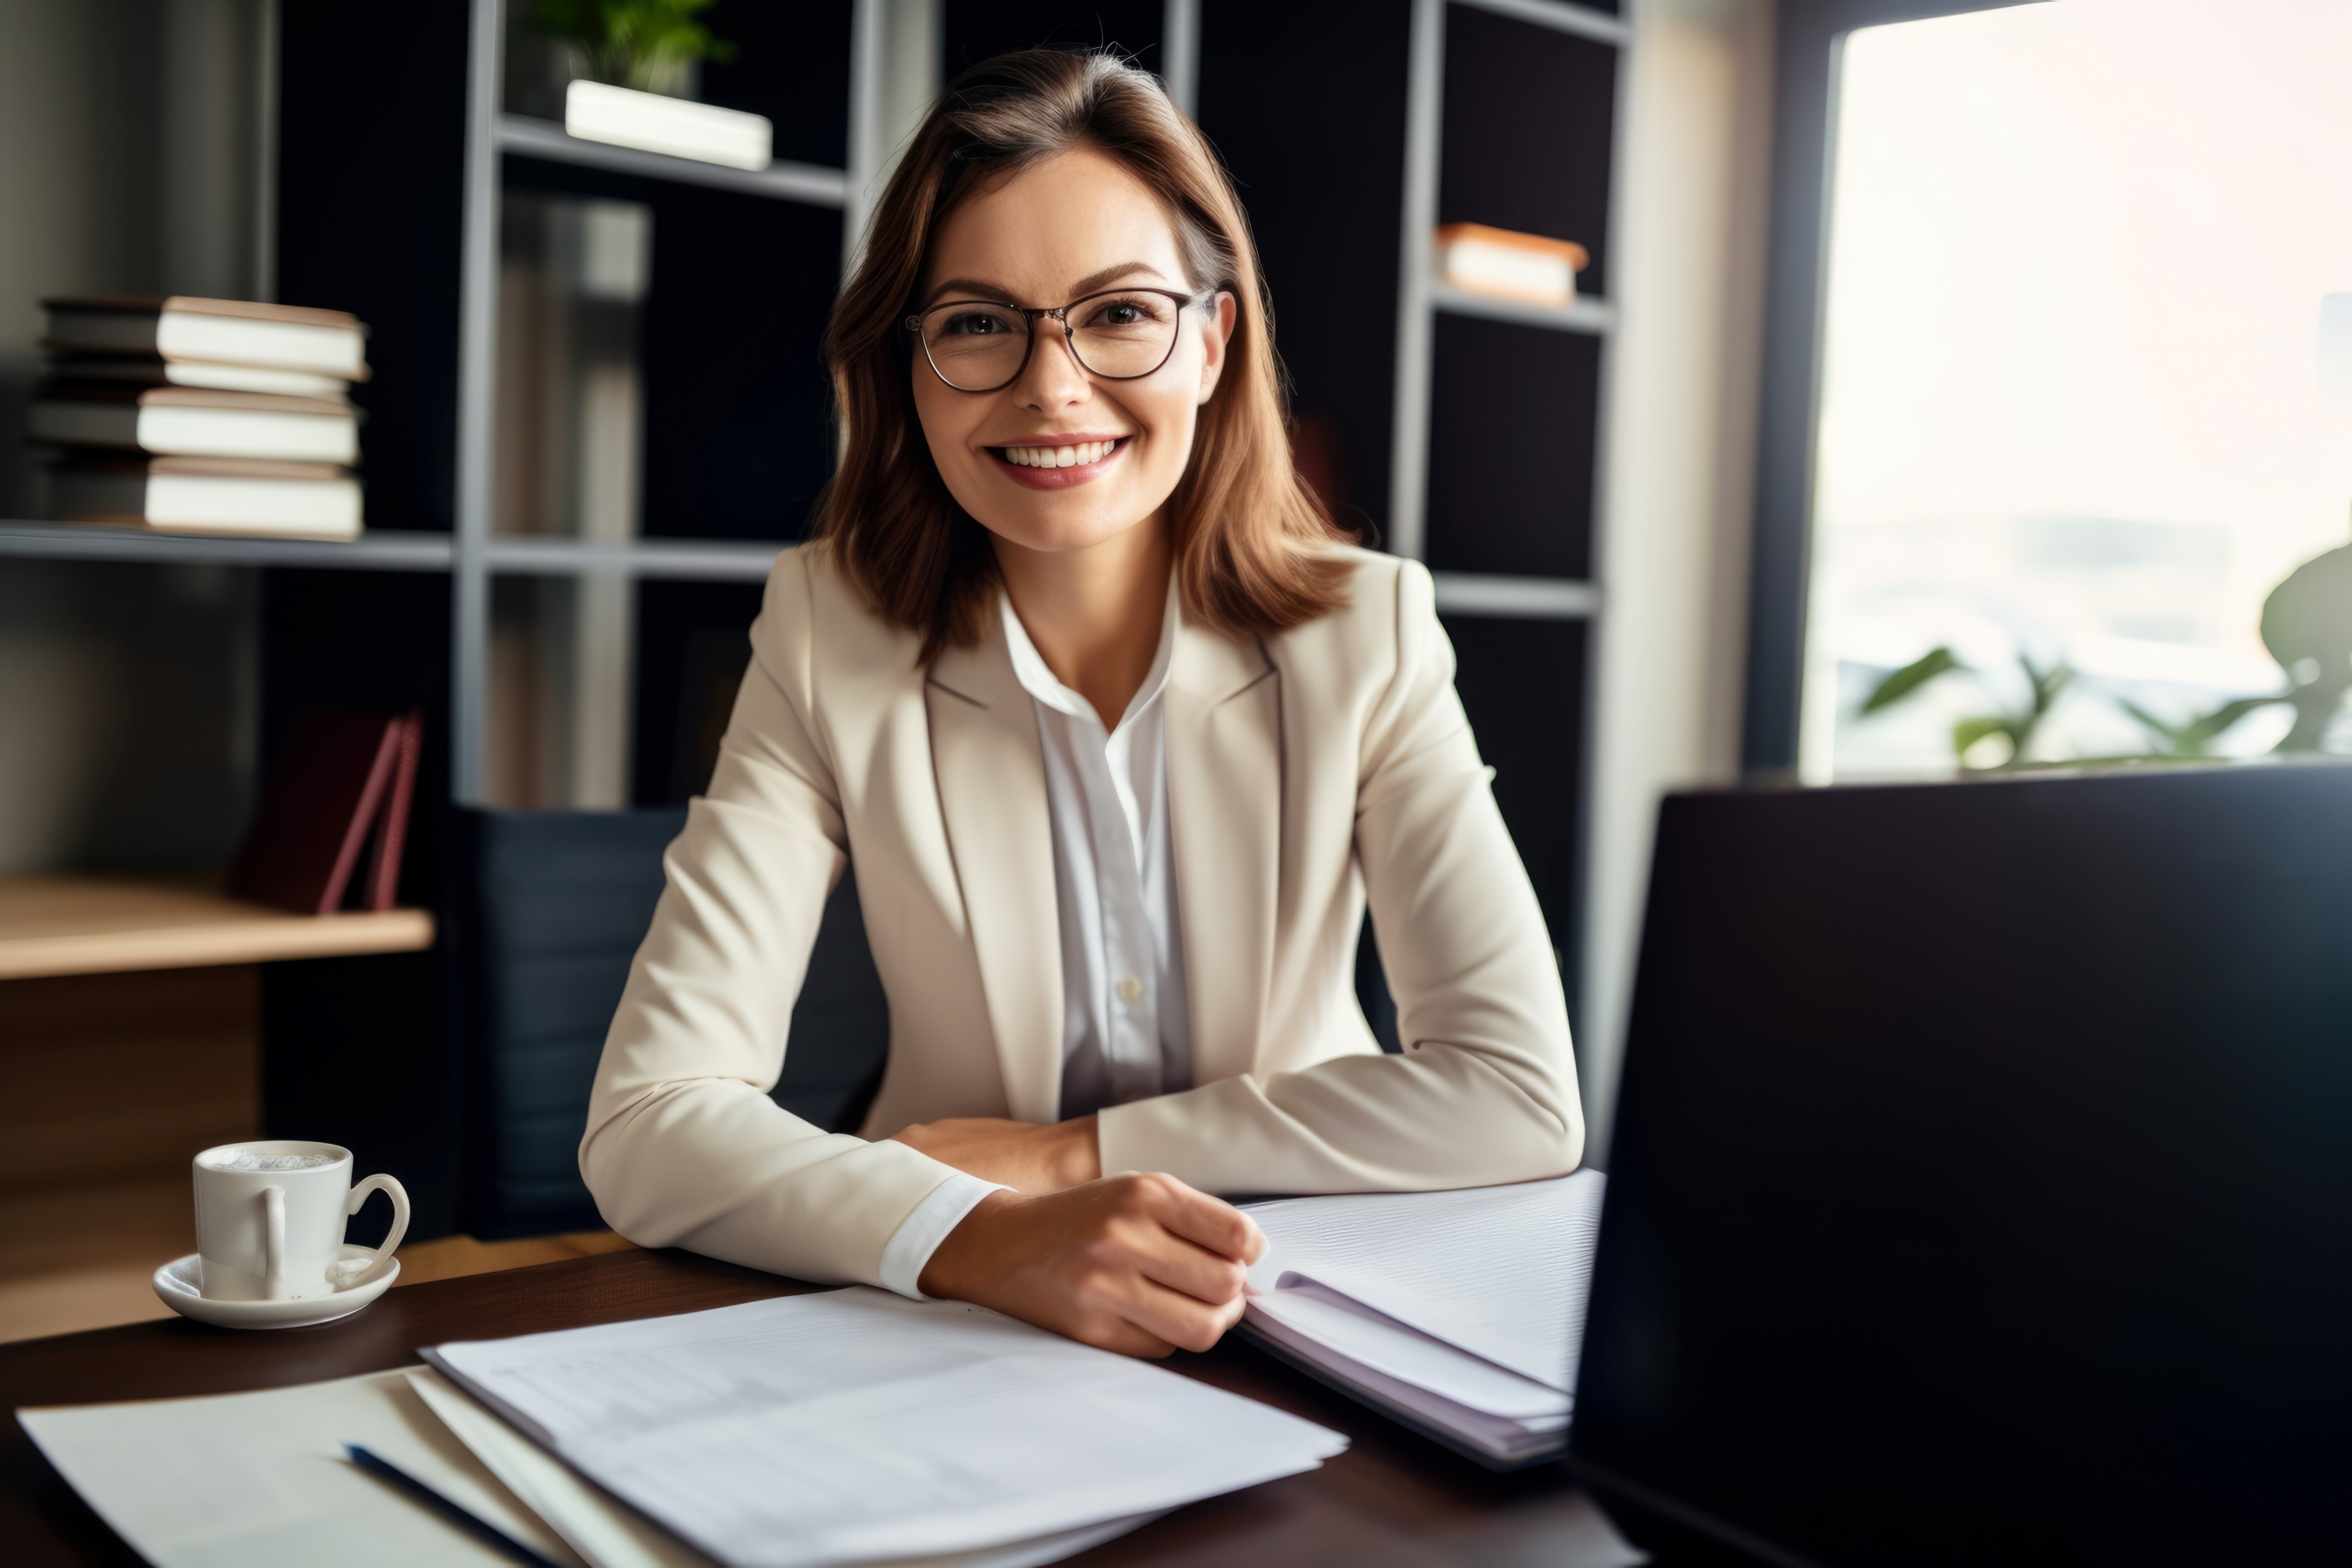 Smiling businesswoman at a desk with laptop and papers